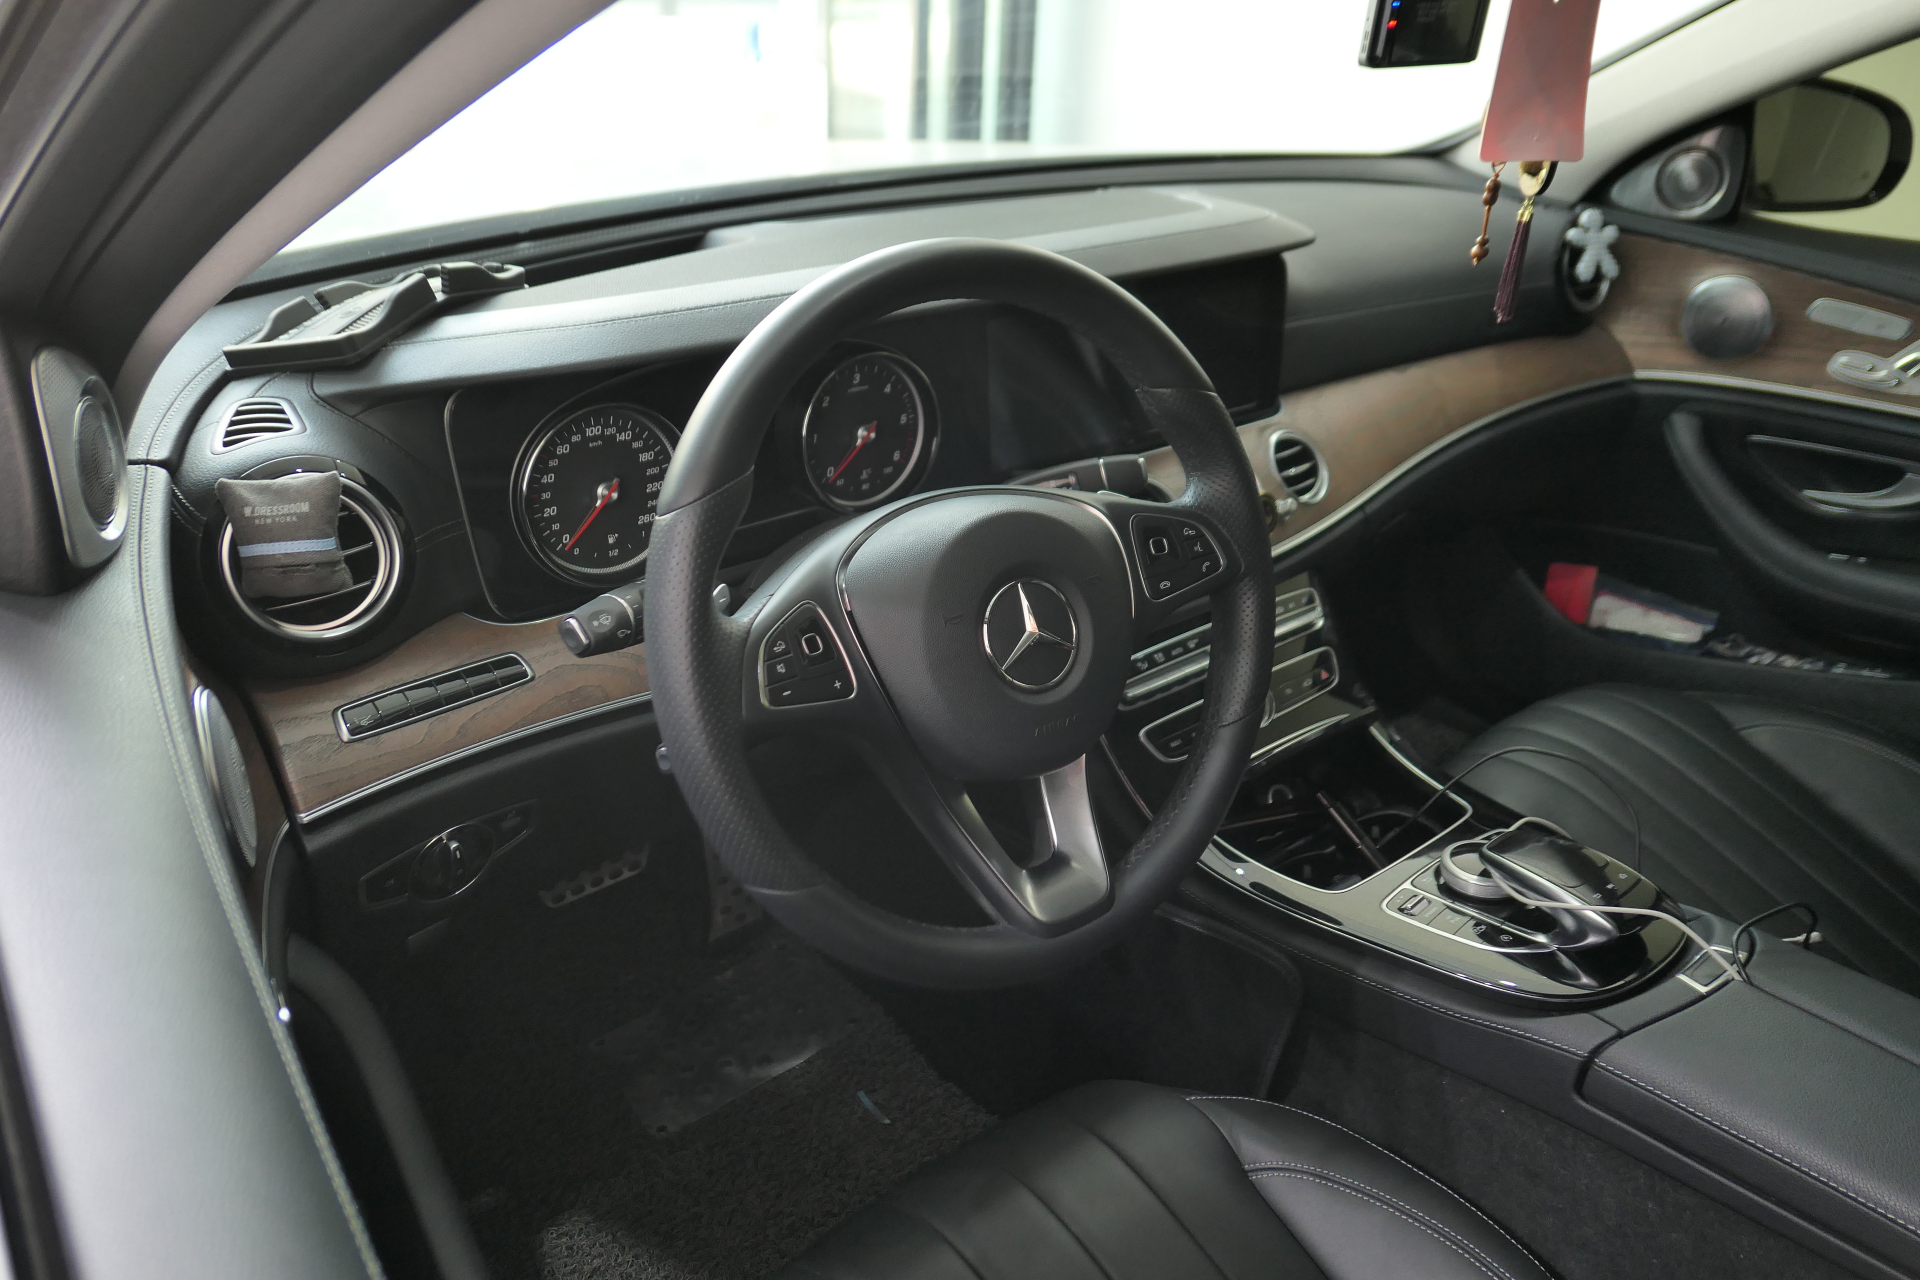 Heating Steering Wheel for 2017 Mercedes E-Class W213 Install